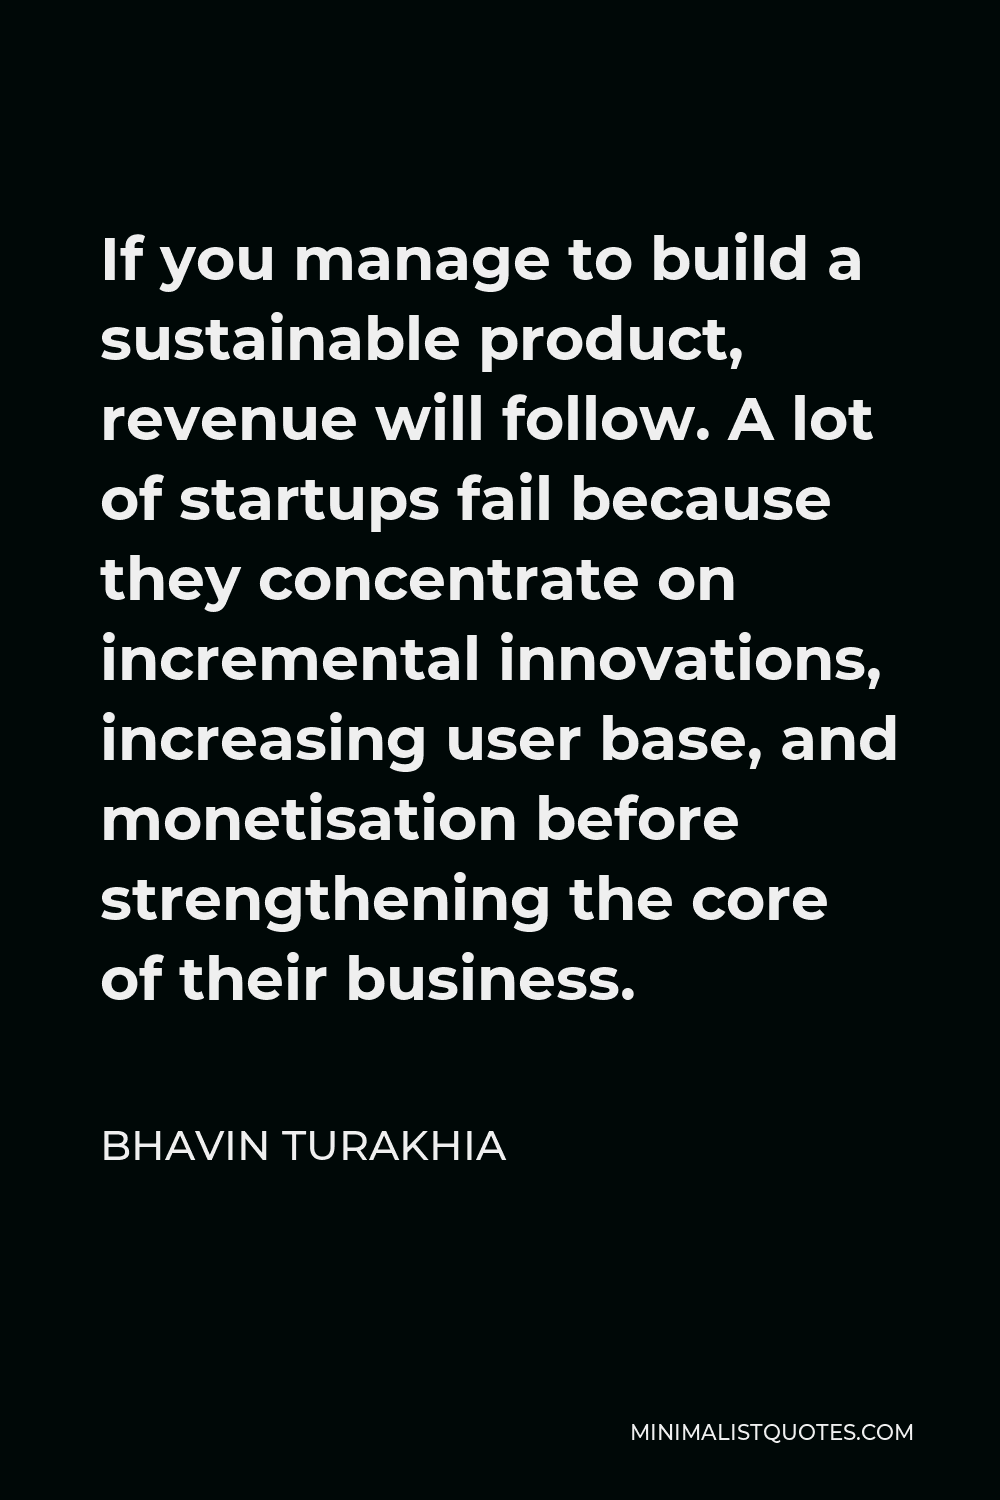 Bhavin Turakhia Quote - If you manage to build a sustainable product, revenue will follow. A lot of startups fail because they concentrate on incremental innovations, increasing user base, and monetisation before strengthening the core of their business.